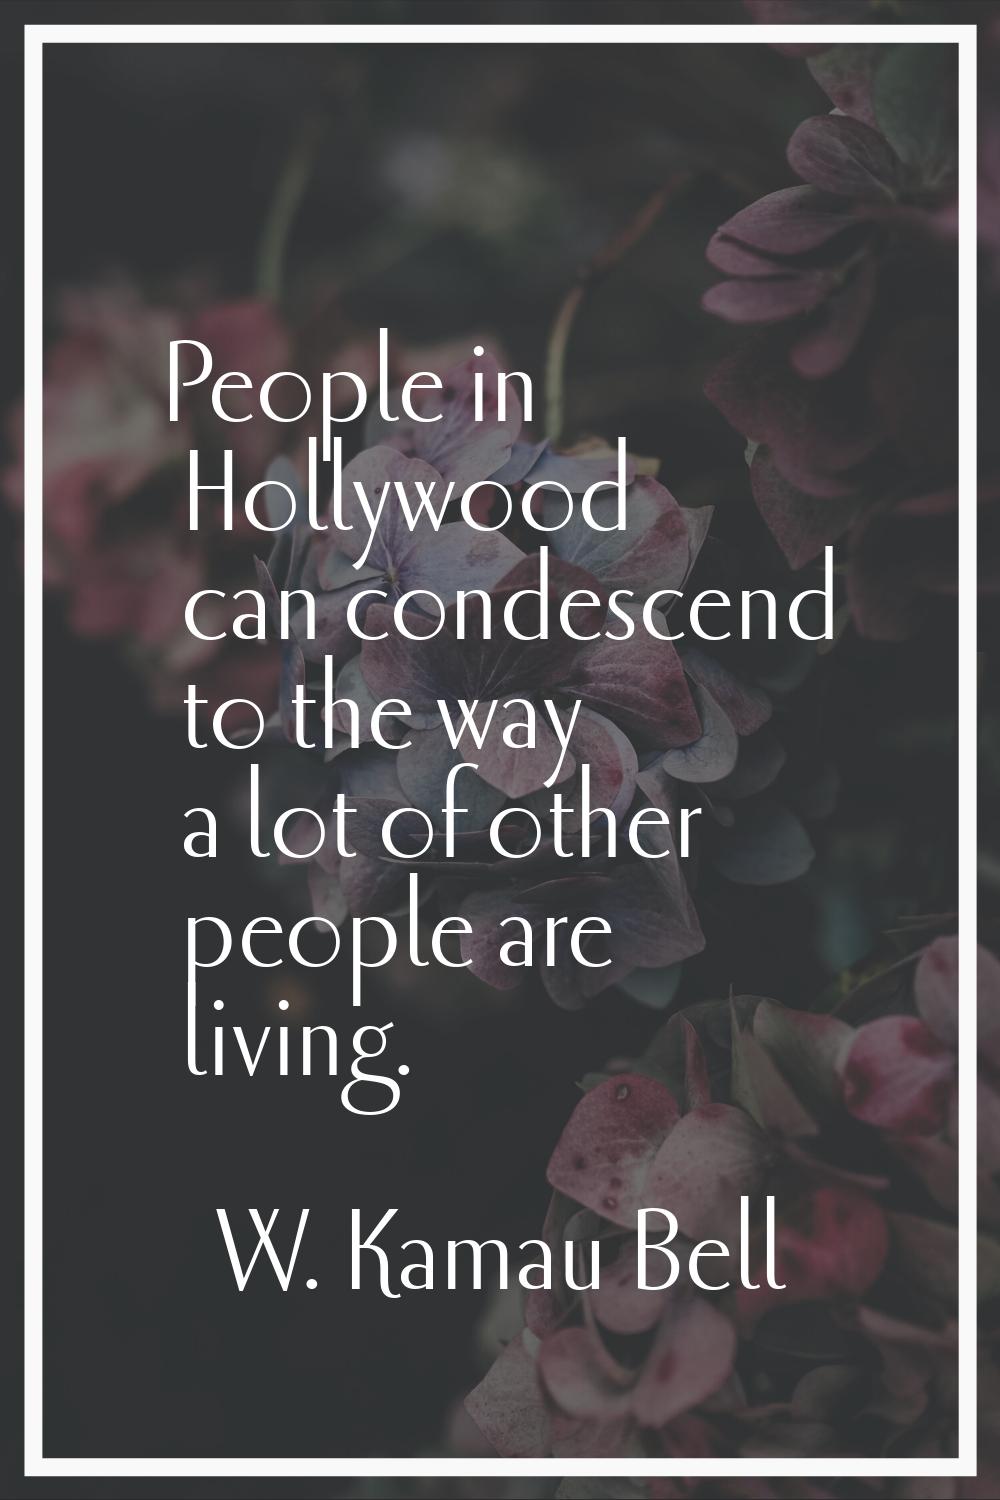 People in Hollywood can condescend to the way a lot of other people are living.